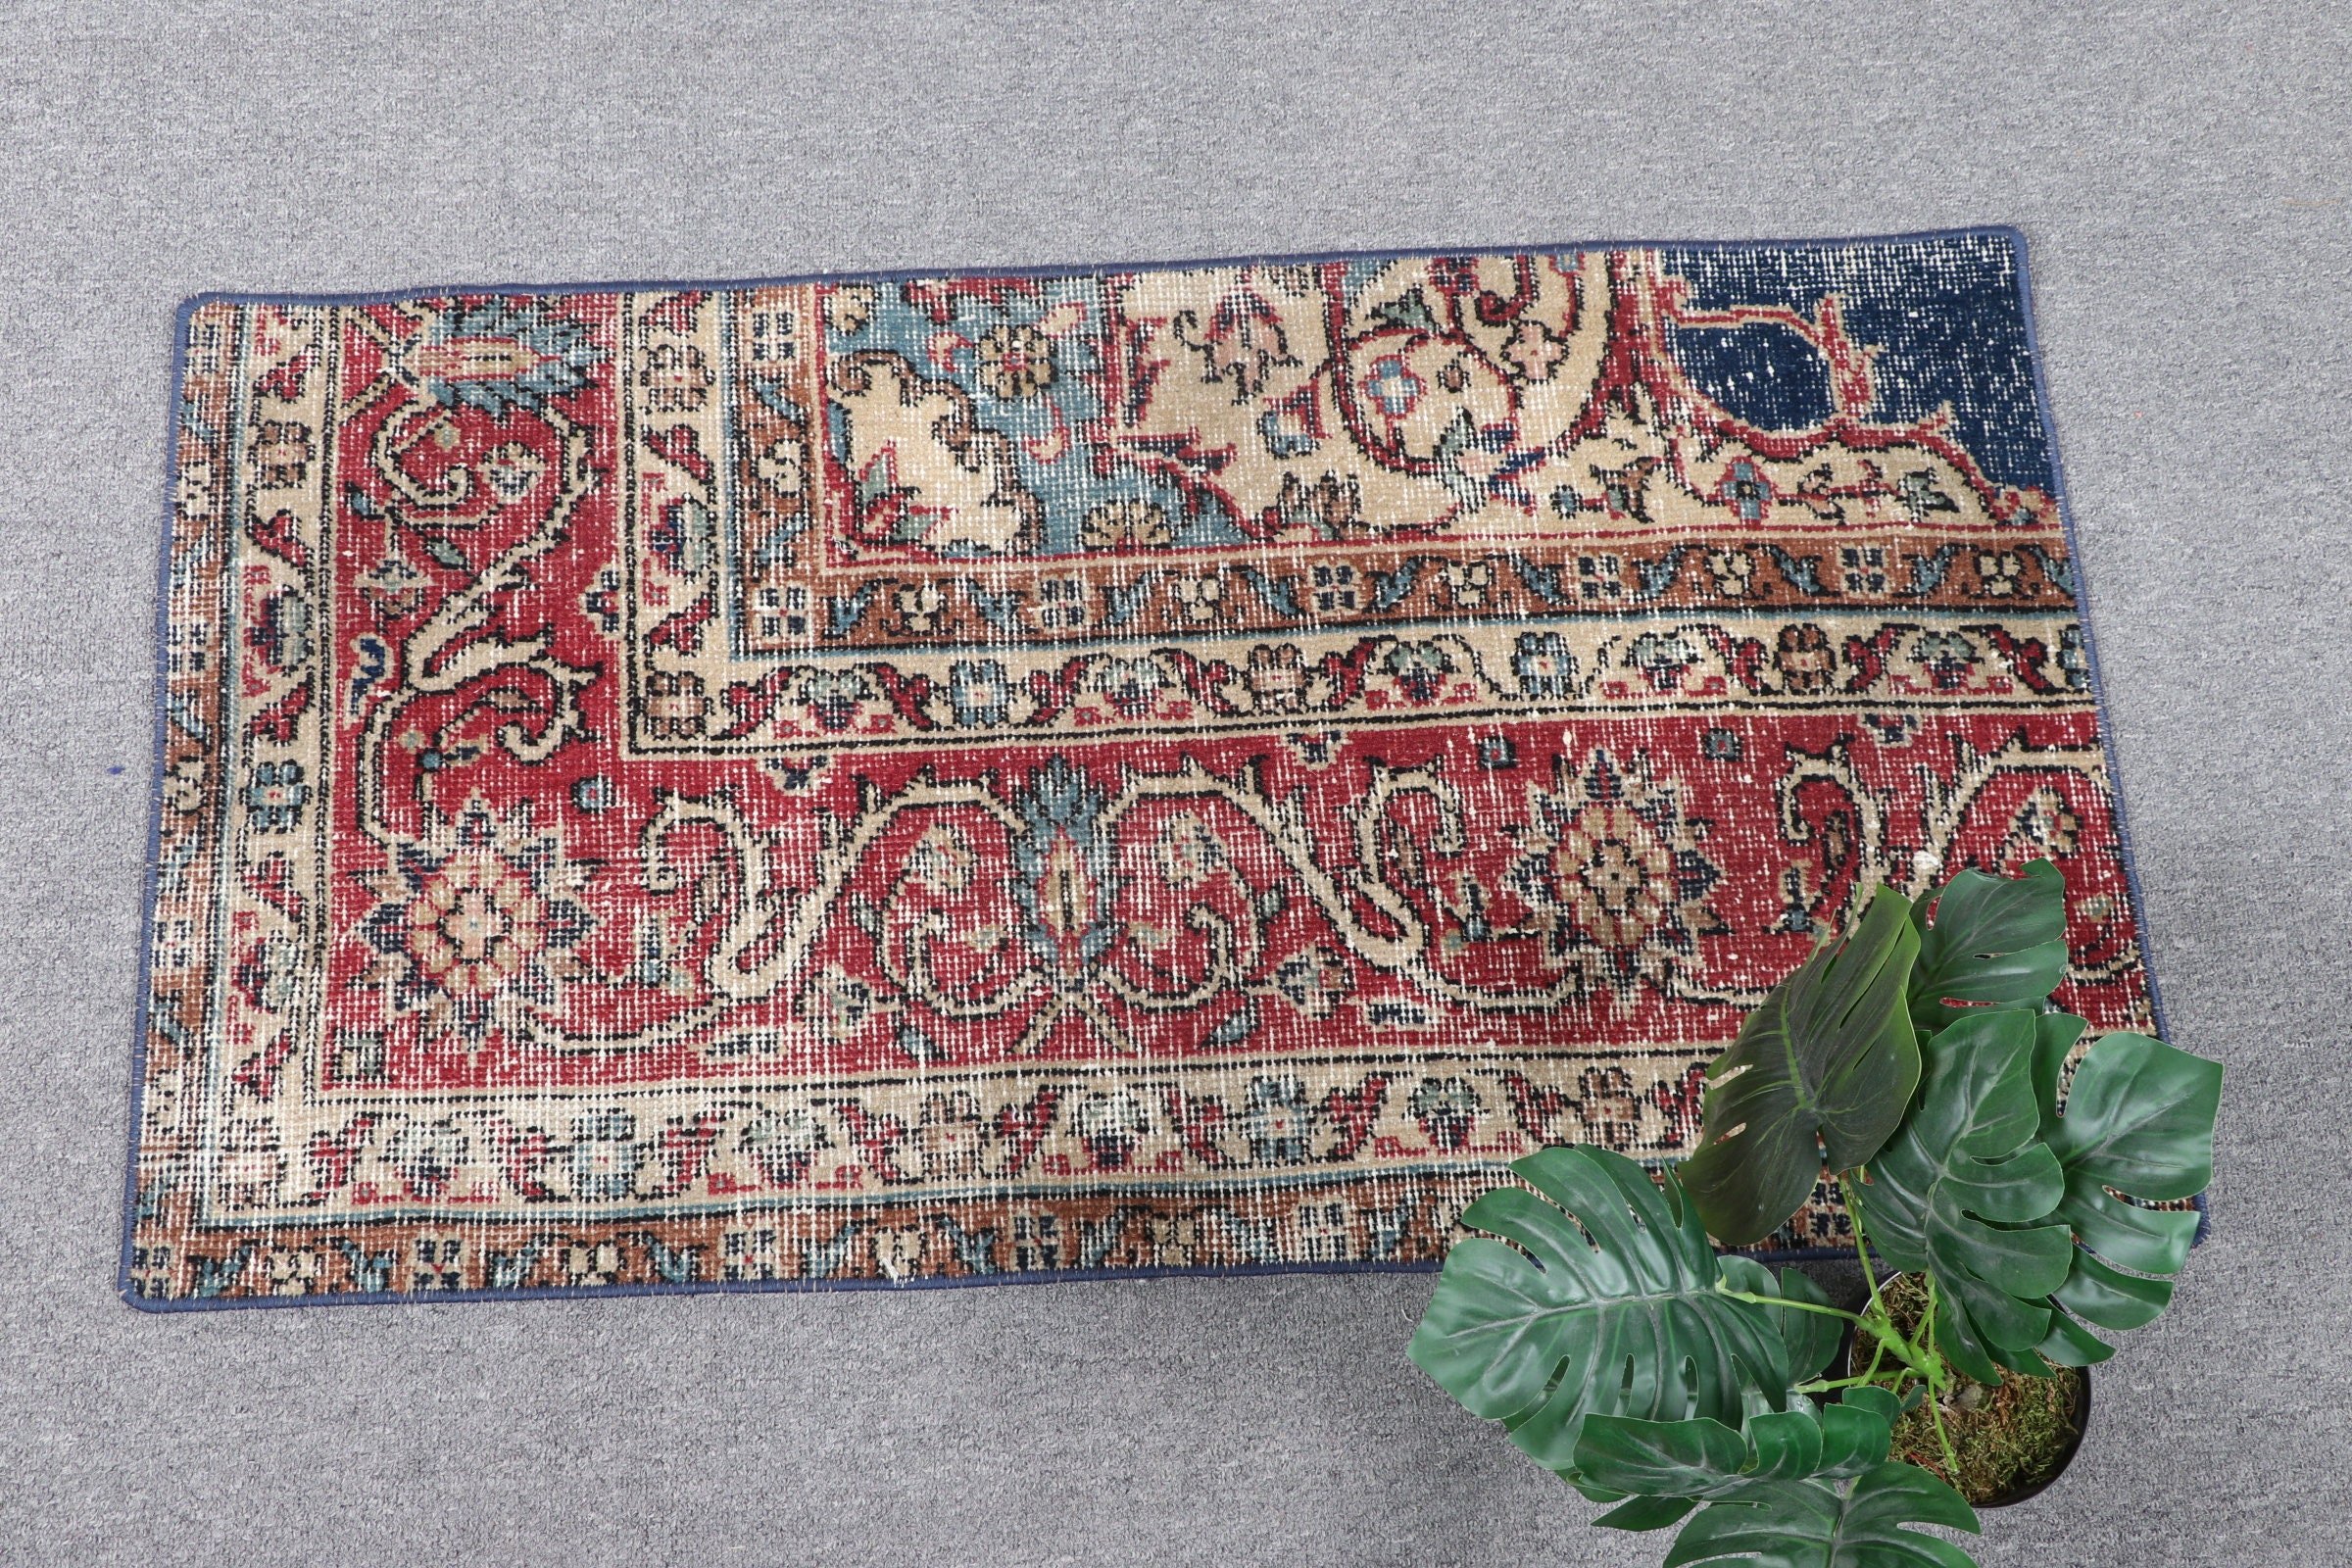 Rugs for Car Mat, Vintage Rug, Car Mat Rugs, Turkish Rug, Red  1.7x3.2 ft Small Rug, Oushak Rugs, Kitchen Rug